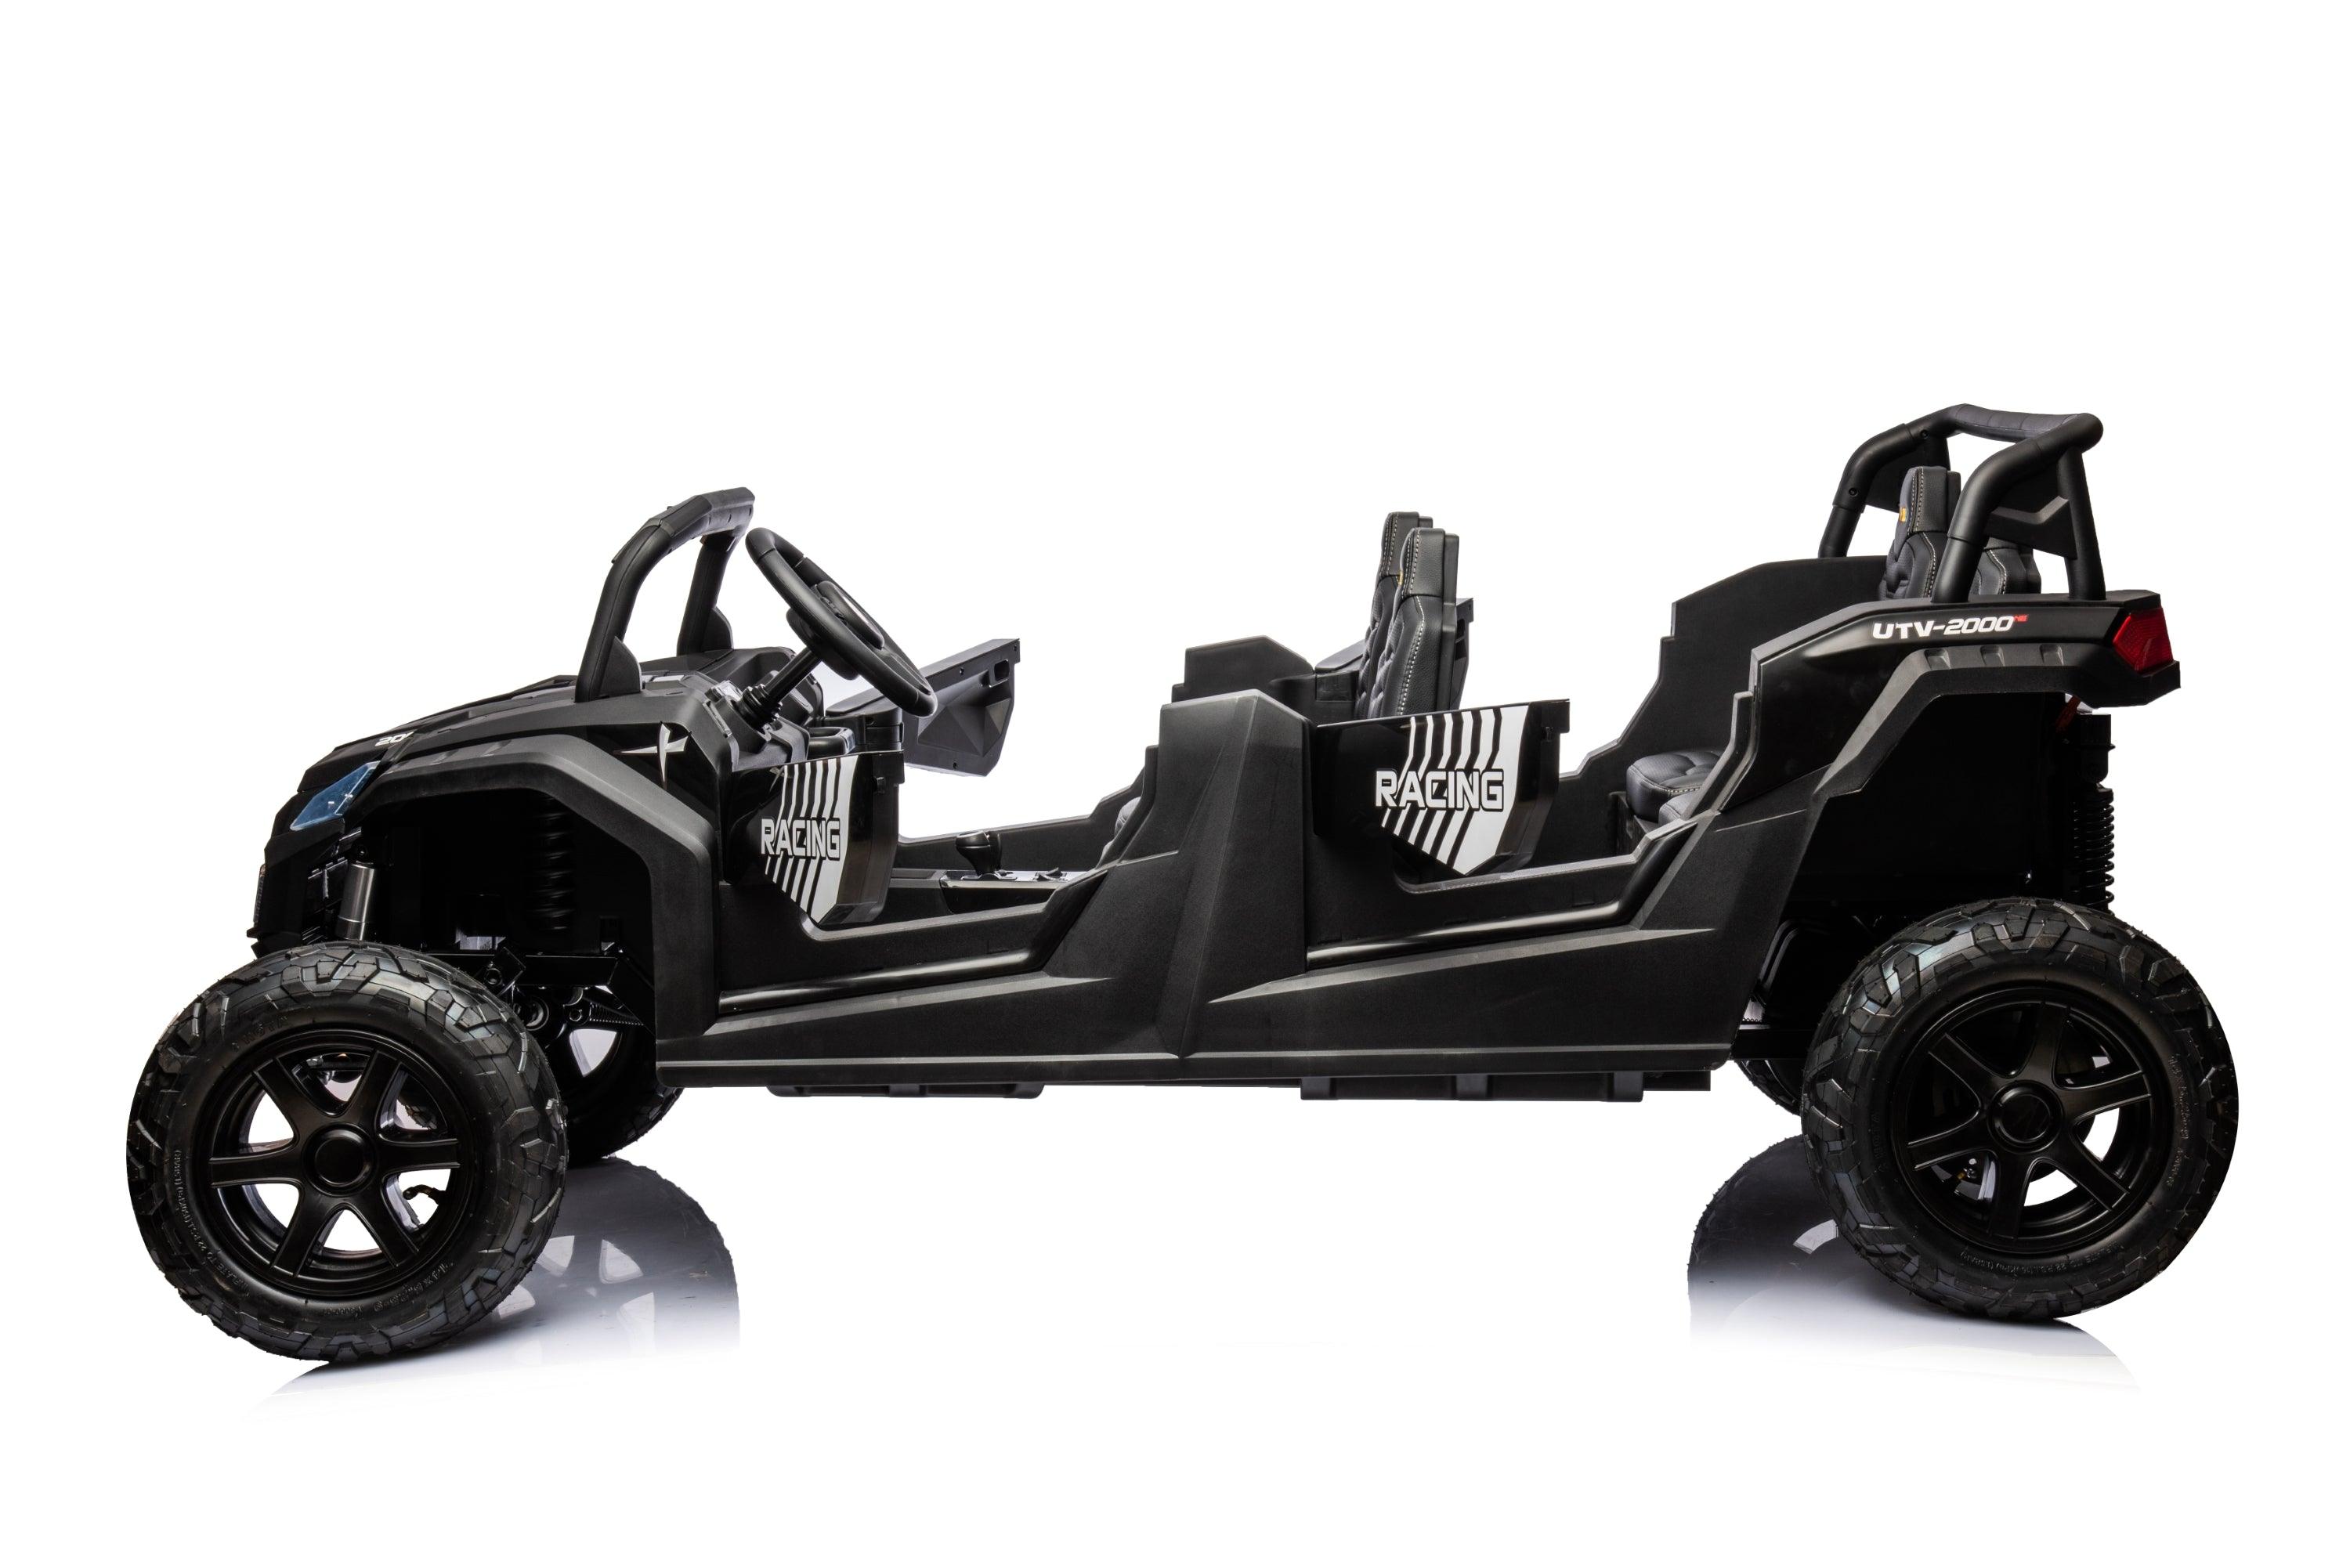 48V Freddo Beast XL: World's Fastest Kids' 4-Seater Dune Buggy with Advanced Brushless Motor & Precision Differential - DTI Direct Canada